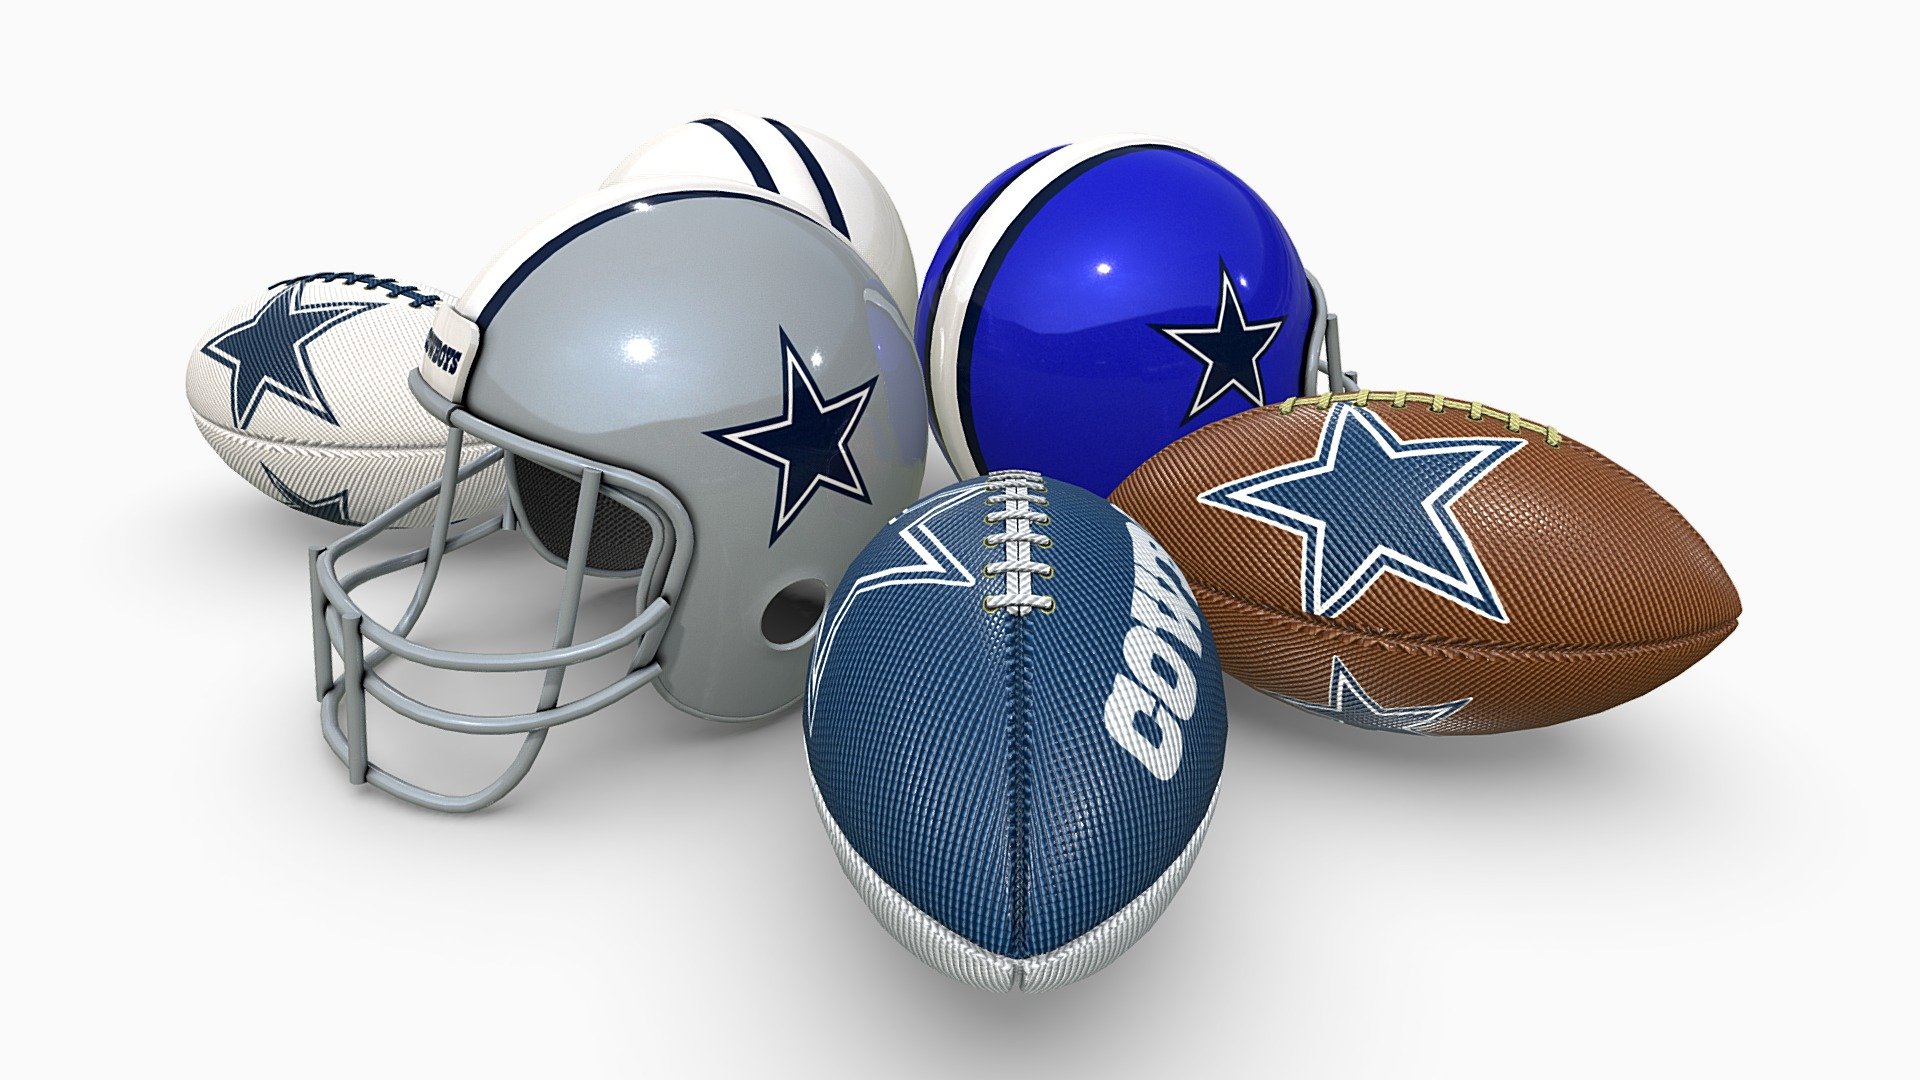 Realtime optimized Dallas Cowboys American Football Vintage Pack

PBR metalness workflow ready textures in native 2048 x 2048 px

Non-overlapping unwrapped with UV layout best for undistorted brandings

Made to real world scale in centimeters

100 % human controlled triangulation

Trianglecount per helmet: 10205 tris at 5231 verts

Trianglecount per ball: 4184 tris at 2178 verts

All objects have own multi-sub-material with 2 x material-IDs

Each object has its own albedo and diffuse map

Each object type shares the same PBR textures set

Included files for download; .obj-mtl, .fbx, .dae, .max (native 2022), .png
 - Dallas Cowboys American Football Vintage Pack - Buy Royalty Free 3D model by RealtimeModels 3d model